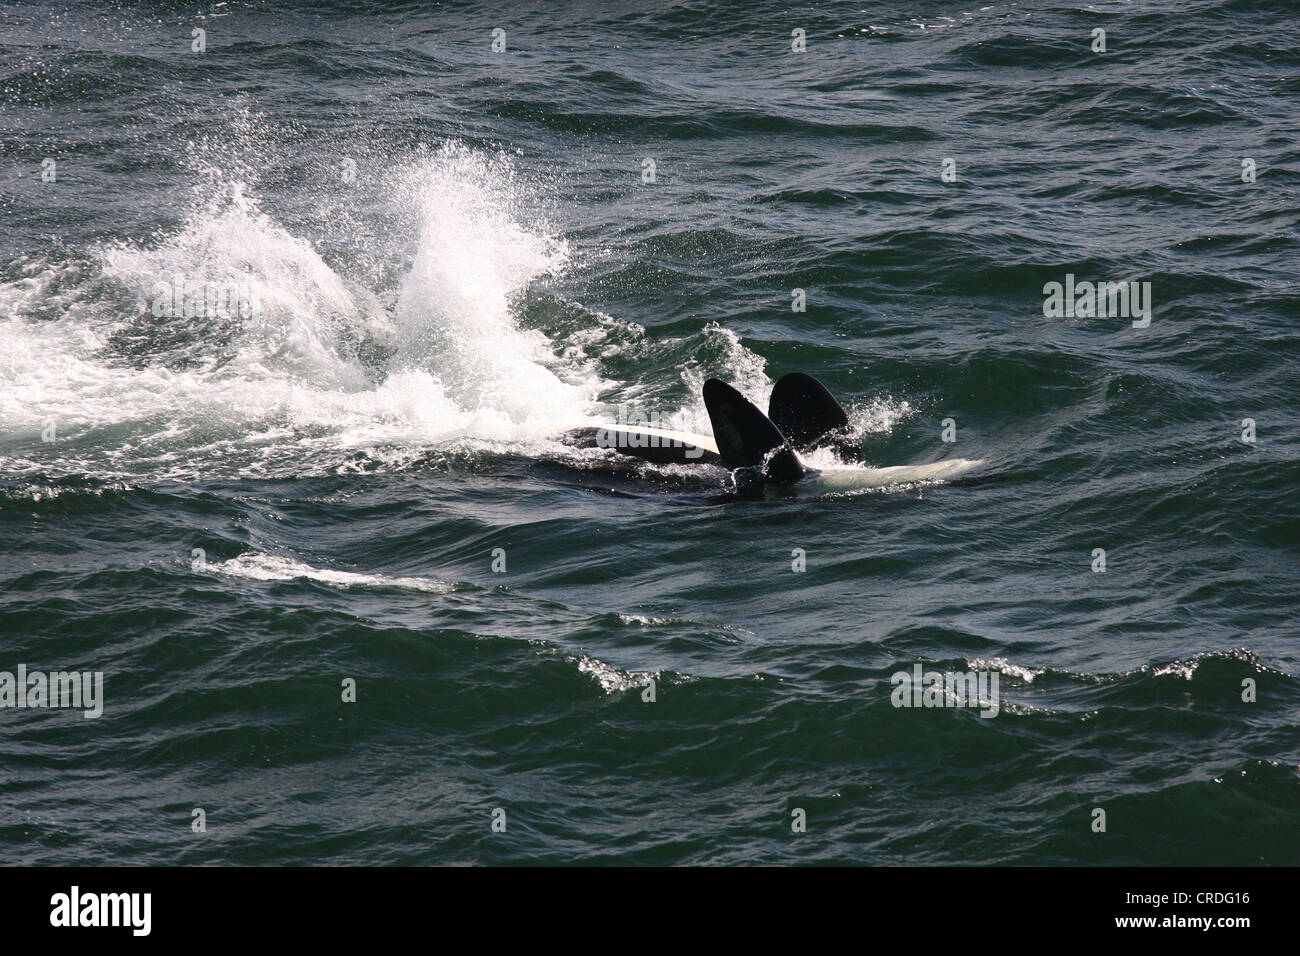 Killer Whale (Orca) slapping its tail while swimming on its back in Swanson Channel west of Pender Island, BC Stock Photo